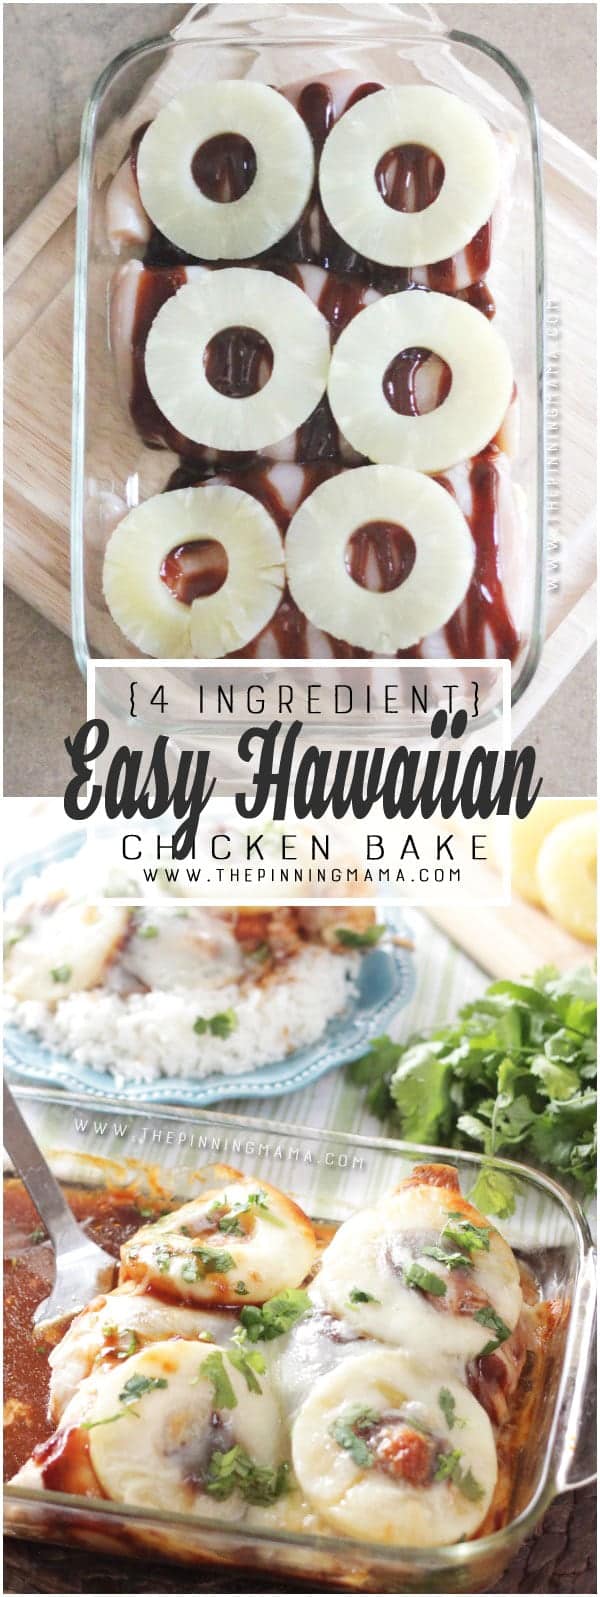 This is CRAZY delicious! And so easy and healthy for dinner! Hawaiian Chicken Bake recipe. Sweet & tangy BBQ sauce, pineapple, and cheese all baked over chicken. YUM!